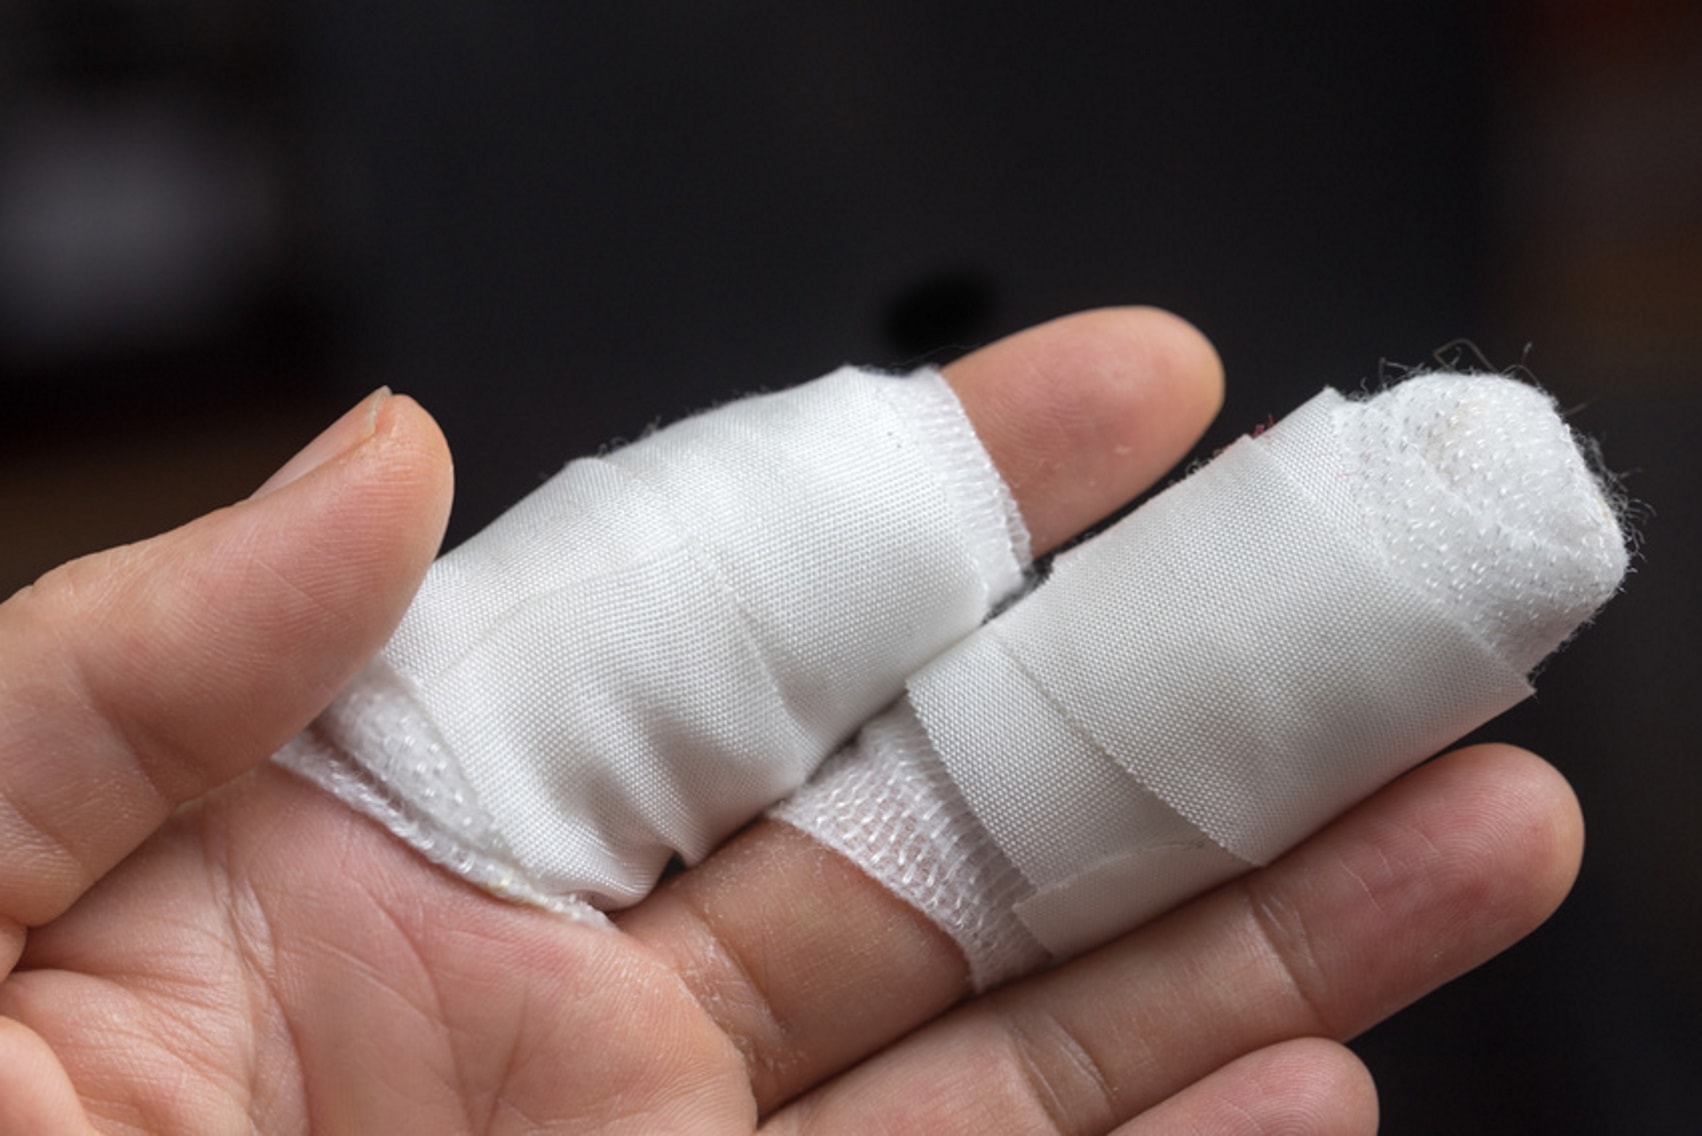 Common Causes of Finger Injuries